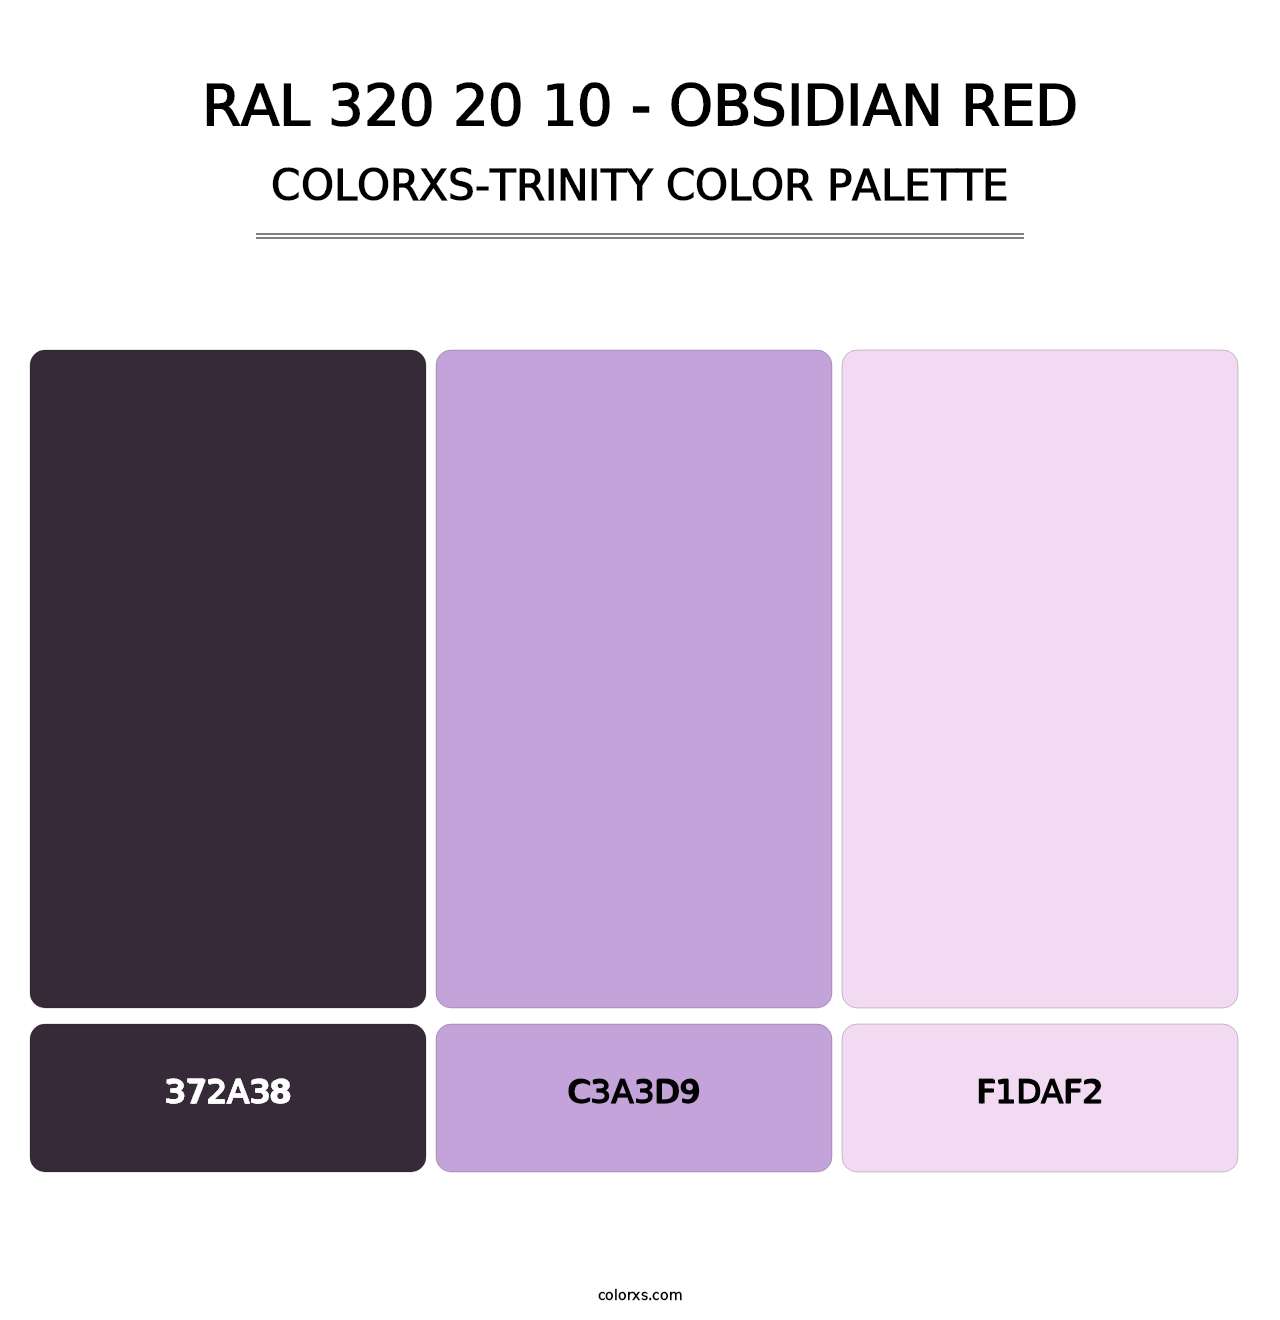 RAL 320 20 10 - Obsidian Red - Colorxs Trinity Palette